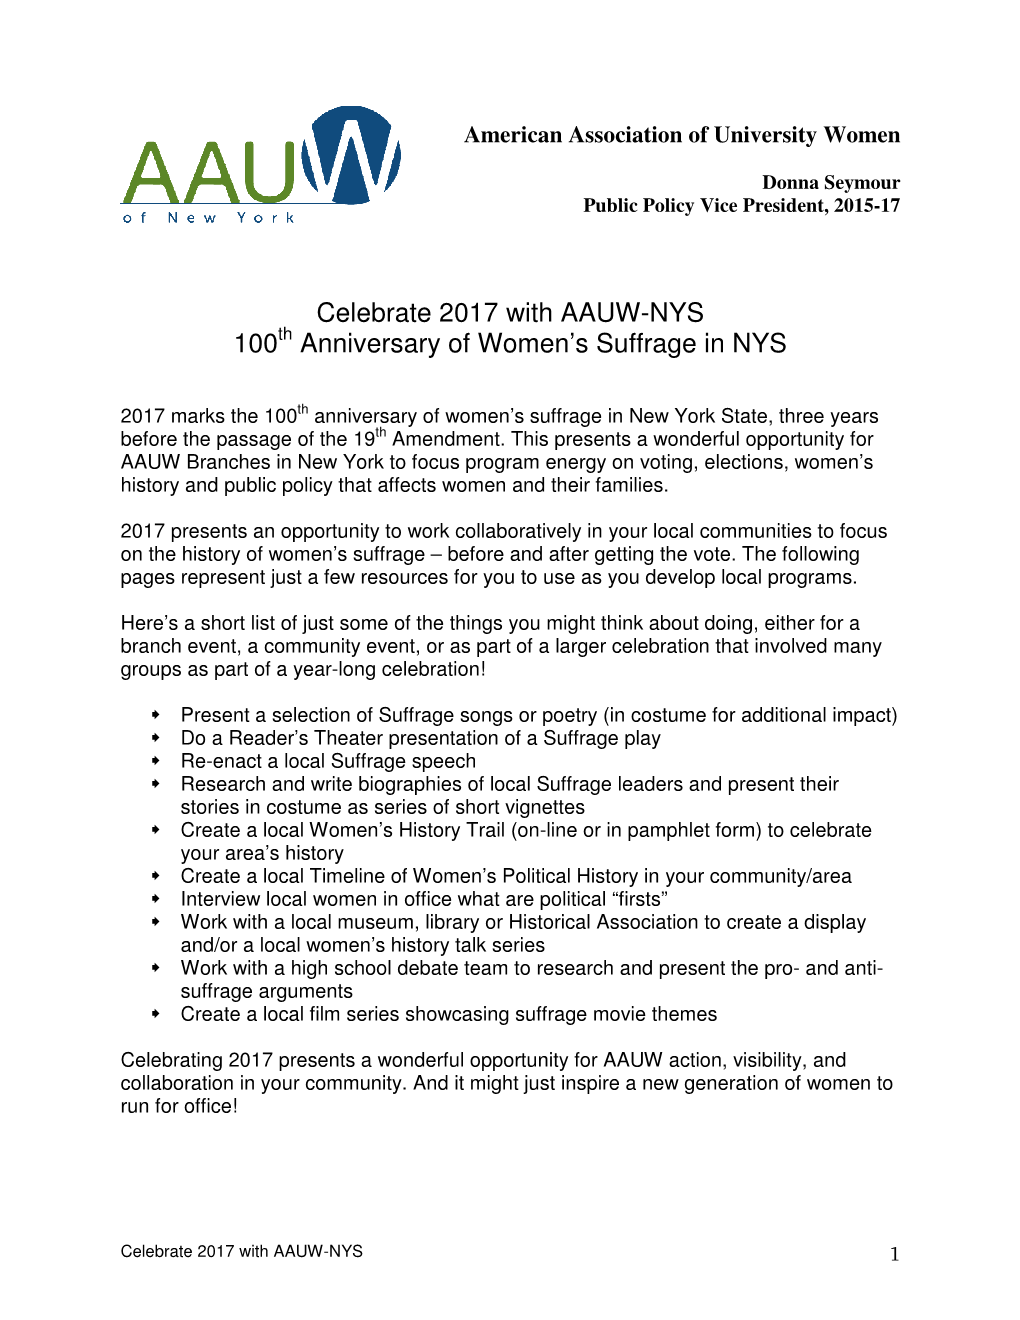 Celebrate 2017 with AAUW-NYS 100 Anniversary of Women's Suffrage In